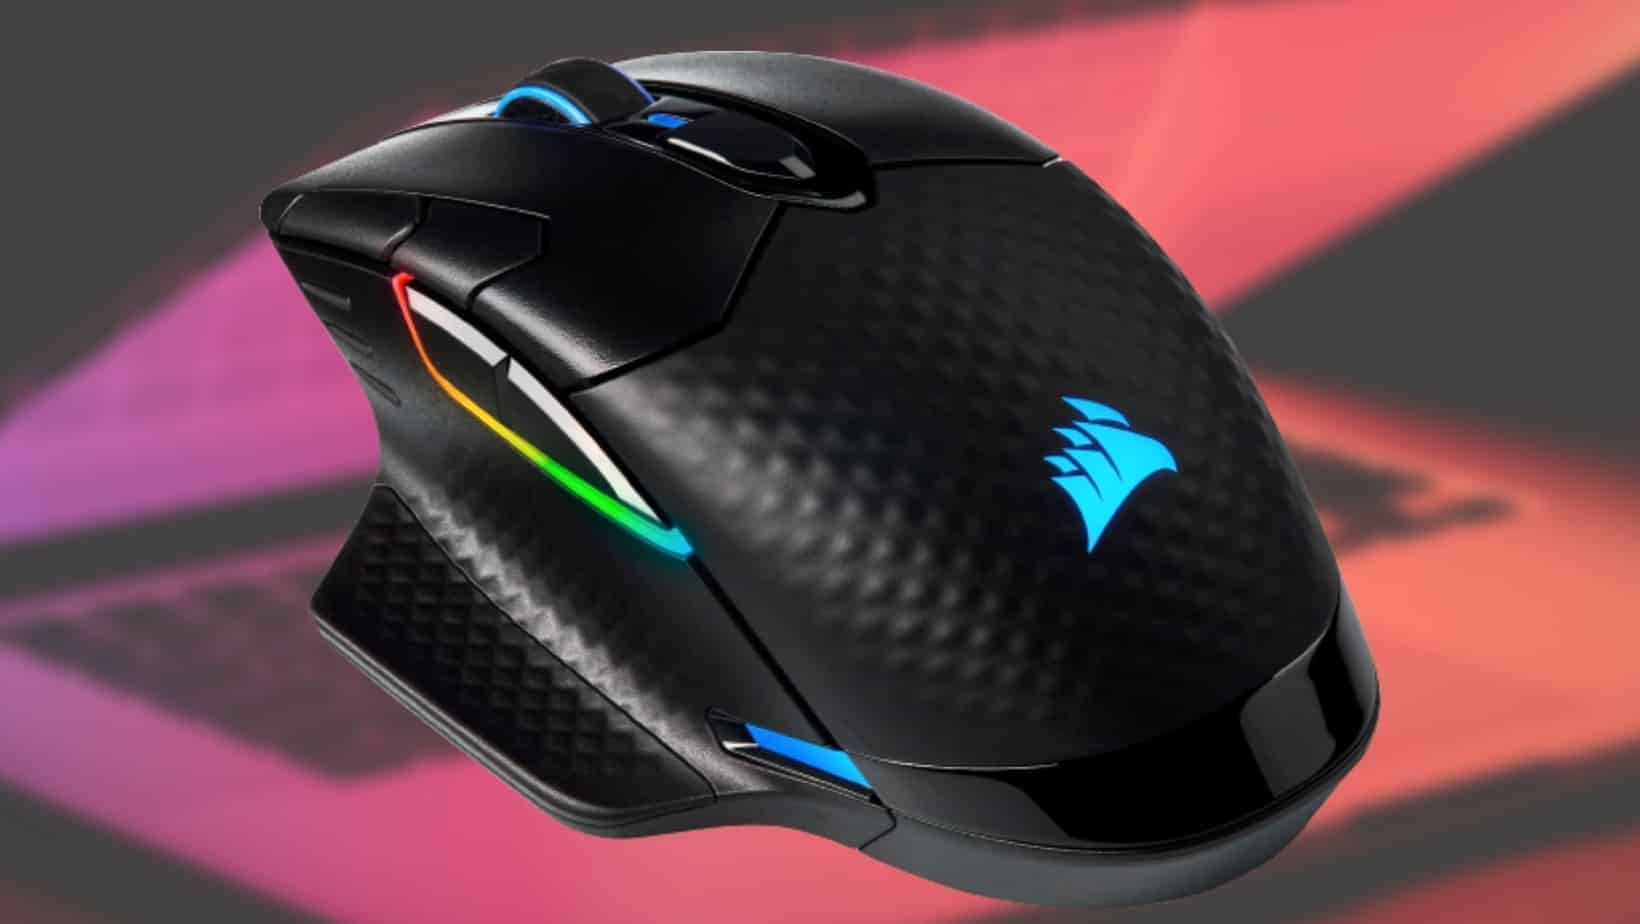   No.6 On Our List Of Best Gaming Mouse Is The Coursera Dark Core Rgb Pro The Coursera Dark Core Rgb Pro Is Amongst The Best Wireless Gaming Mouse. This Mouse Will Give You Up To 18Hrs With Standard Lighting Or 50Hrs With The Lighting Off On A Single Charge. It Also Has Wireless Charging Capabilities With Lithium-Polymer Batteries, Usb Wired Play Options And Eight Programmable Buttons With 50M L/R Click. It Also Has An 18,000 Dpi Optical Sensor, It'S Got 9 Zone Rgb Rgb Backlight Customization, And Weights Only At 133G.   Its Pros Are: Cleaner Layout Than Non-Pro Versions Remodelled Side Macro Buttons Attractive Price Wireless Charging Highly Customizable Lighting Good Battery Life Its Cons Are: The Textured Grip Is A Bit Slippery Fewer Buttons Than The First Dark Core Shape Favours Palm Grip Potential Wireless Issues No.5 On Our List Of Best Gaming Mouse Is The Steelseries Sensei 310 Steelseries Sensei 310 Gaming Mouse Is Ideal For Both Left- And Right-Handed Users Thanks To Its Ambidextrous Design. Its Software Runs The Eight-Button Programming Interface. It Allows You To Program Buttons And Create Game Profiles, And You Can Also Adjust The Dpi, Modify The Rgb Lighting, 12,000 Dpi Sensor And Much More. The Gaming Mouse Responds Instantly To The Inputs, Which Is Ideal For Gaming Because Of Its Quick And Precise Movements. The Sensei 310 Weighs About 92G. Its Is Compatible With All The Major Os. Split-Trigger Left, And Right Buttons Ensure 50 Million Clicks Durability. Its Software Can Be Used To Control The Mouse, Which Takes Up Only 108 Megabytes. Its Pros Are:   It Has A Lightweight Structure;  A Wide Range Of Intuitive Functions;   Suitable For Both Left And Right-Handed Users;   It Is Made With A Dpi Toggle For Greater Control. Its Cons Are: It Might Be Tiny For Large Hands. Fairly Stiff Rubber Cable. Borderline Heavy. No.4 On Our List Of Best Gaming Mouse Is The Hyperx Pulsefire Core The Hyperx Pulsefire Core Is Amongst The Most Common Names When It Comes To Gaming. The Exterior Structure Was Designed To Be Comfortable And Perform Well. This Design Also Provides A Better Grip For Critical Manoeuvres And Movements In-Game. The Device Is Light With Its 87G Weight, Making It One Of Our Most Lightweight Mouse Options. The Lightweight Design Allows For Faster Control And Greater Accuracy. Its Components And Performance Are Reliable, Despite Offering The Low Price. The Mouse Features A Sturdy Braided Cable And 100 Hz Polling. The Mouse Also Has 6200 Dpi For Precise Movement. The Pulsefire Core Features A Functional Design That Includes Textured Side Grips To Accommodate The Claw And Palm Grips. It Has Seven Programmable Buttons That Have Been Tested For 20 Million Clicks. It Has A Pixart 3328 Sensor And Supports Dpi Settings Up To 6200; Also, It Comes With A Braided Cable. Its Pros Are:  Good Choice Of Materials Great Sensor Performance Excellent Build Quality Decent Buttons Nice-Looking Rgb Lighting Relatively Light And Flexible Cable Fantastic Value For The Price Its Cons Are: Minimal Performance Settings Are Available Extremely Heavyweight Software No Replacement Mouse Feet Included No.3 On Our List Of Best Gaming Mouse Is The Logitech G305 The Logitech G305 Gaming Mouse Is An Excellent Value For The Buck And Offers Outstanding Performance. It Features A Scroll Wheel With Ridges And Thumb Buttons. The Sleek, Minimalist Design Of This Device Is Both Suitable For Claw &Amp; Palm-Grip Players. The Logitech G305 Wireless Mouse Runs On One Double-A Battery, Which Gives You A Runtime Of 250 Hours On One Charge, So Thats Like A Marathon For Any Mouse. The Wireless Connectivity Is Available Even Up To 10 Feet Away. The Gaming Mouse Is Simple In Design, But It Delivers Excellent Performance. It Has A Dimension Of 4.5X2.5 Inches And Stands Just 1.5 Inches High. It Weighs Only 3.4 Ounces And Is One Of The Lightest Full-Size Wireless Mouse Inspite Of Giving Such A Battery Backup. This Mouse Has Six Buttons: Left, Right, And Clickable Scroll Wheels, A Dpi Sensitivity Adjuster And Two Thumb Buttons. Logitech G305 Has A 12,000 Dpi Optical Sensor And 4 Dpi Sensitivities. Its Pros Are:   It Offers Smooth Manoeuvrability Due To Its Lightweight Structure;   It Is Affordable As Compared To Others;  Its Buttons Are Customizable With The Logitech Gaming Software;  A Wide Range Of Connectivity (10 Feet);  Its Sensor Performs Well. Its Cons Are: 250 Hours Of Battery Isn'T Much For Regular Users Rated For Only 10 Million Clicks No Bluetooth Option No.2 On Our List Of Best Gaming Mouse Is The Razer Viper Ultimate Razer Viper Ultimate Gaming Mouse Is Compact, Lightweight, And Durable. The Razer Viper Ultimate Has A Tight Design And Quality Structure To Prevent Rattling Or Shaky Sounds When It Is In Use. To Provide Comfort For Both Right And Left-Handed Users, It Has 2 Buttons On Each Side. The Device Supports Bluetooth Connectivity And Has A Brilliant 9-Millisecond Latency. Eight Programmable Buttons Allow For Configuration And Adjustment. It Weighs In At 75G And Comes With Razer Synapse 3, Which Will Enable You To Adjust Toggles And Customize The Viper Ultimate. The Wireless Gaming Mouse Can Last Up To 70 Hours Without Needing To Be Charged. The Focus+ 20K Dpi Optical Sensor Feature Allows You To Track A Speed Of 650 Inches Per Second, Which Will Enable It To Keep Up With Your Rapid Movements. In Addition, Razer'S Hyperspeed Wireless Technology Provides Significantly Less Latency Than Any Other Mouse Currently On The Market.  Its Pros Are:   It Comes With An Ambidextrous Design;  It Offers Instantaneous Response With Low Latency;  The Toggles Are All Customizable,   Its Battery Life Is Long. Highly Recommended For Small And Medium Hands Palm Grip.  The Cons Are:   Its Buttons Can Be Pretty Delicate; A Bit Expensive For The Complete Package. Not Recommended For Huge Hands. No.1 On Our List Of Best Gaming Mouse Is The Logitech G502 Logitech G502 Gaming Mouse Is Highly Regarded By Professional Gamers Who Compete In International Competitions. Logitech'S Most Precise Next Gen Hero Sensor Offers Up To 16,000 Dpi Light-Speed While Gaming, Which Is Almost Mind-Numbing. You Can Also Charge It At Speed Even While It Is Being Used, So There Is No Need To Cut Out Of The Game If You Forgot To Charge. Logitech G502 Has Powerplay Wireless Charging, Which Allows For Charging In Both Use And Rest Conditions. The Battery Can Last Up To 60 Hours When Fully Charged. The Device Has 11 Programmable Buttons And A Scroll Wheel That Is Hyper-Fast, Plus It Can Be Programmed To Adjust The Polling Rate Up To 1000Hz. The Mouse'S Design Also Includes An Adjustable Weight System, Which Allows You To Place Up To Six Weights Inside. Logitech G502 Features Lightsync Rgb Technology That Will Enable Users To Adjust Rgb Lighting Using Nearly 16.8 Million Colours Which Is An Overkill For Us However Significant For Many. It Can Be Used On Both Mac Os And Windows. Its Pros Are:   It Has Terrific Battery Life;  It Has A Compact And Sturdy Structure;  It Ensures Low Latency;  It Has An Excellent Sensor Performance. Its Cons Are: Extra Buttons Prone To Accidental Misclicks Bit Of An Underwhelming Update Design Isn'T Ideal For Multiple Grips  